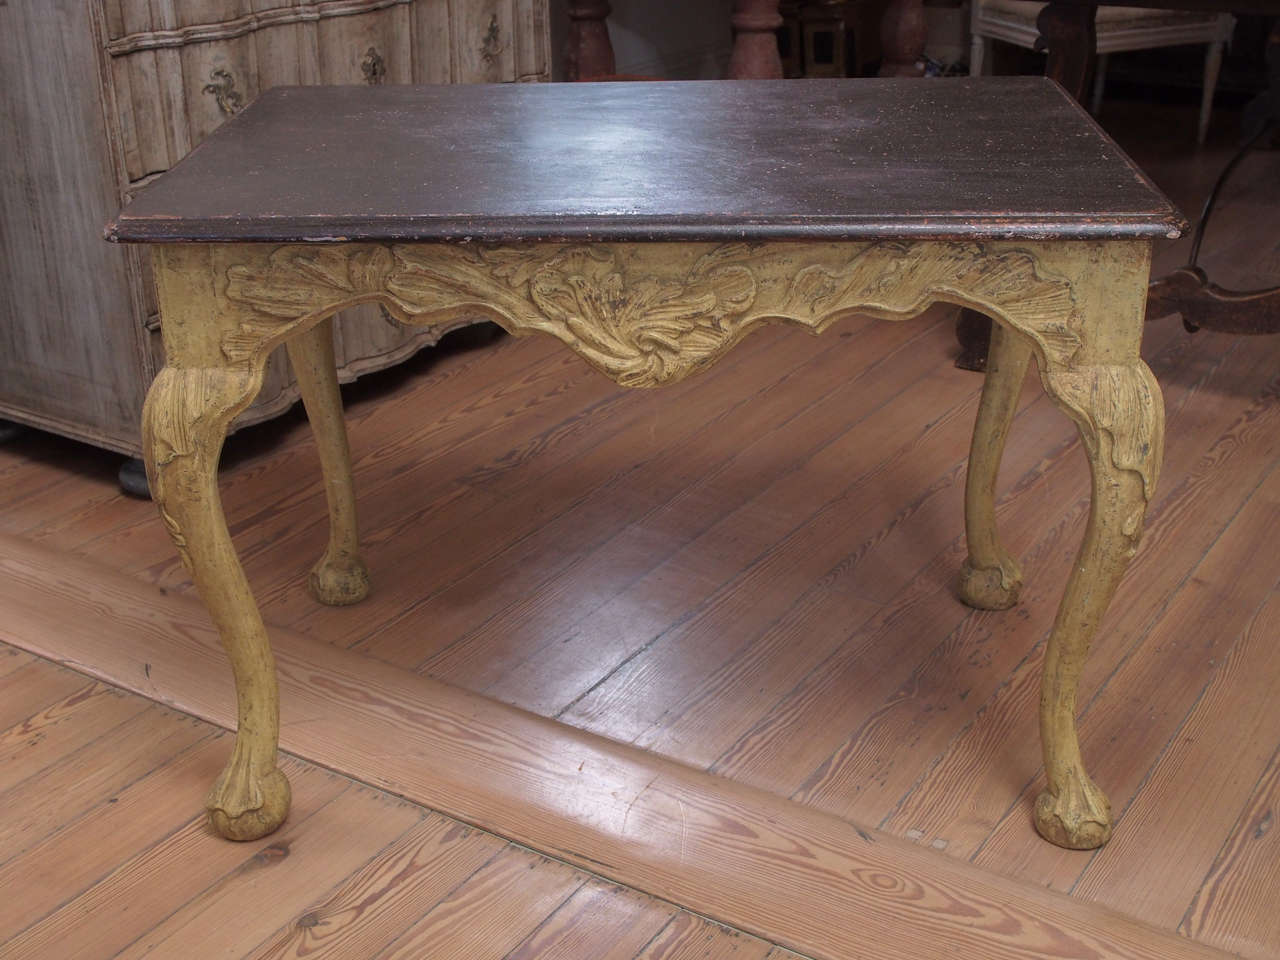 Center table with faux porphory top and carved cabriole legs and apron.